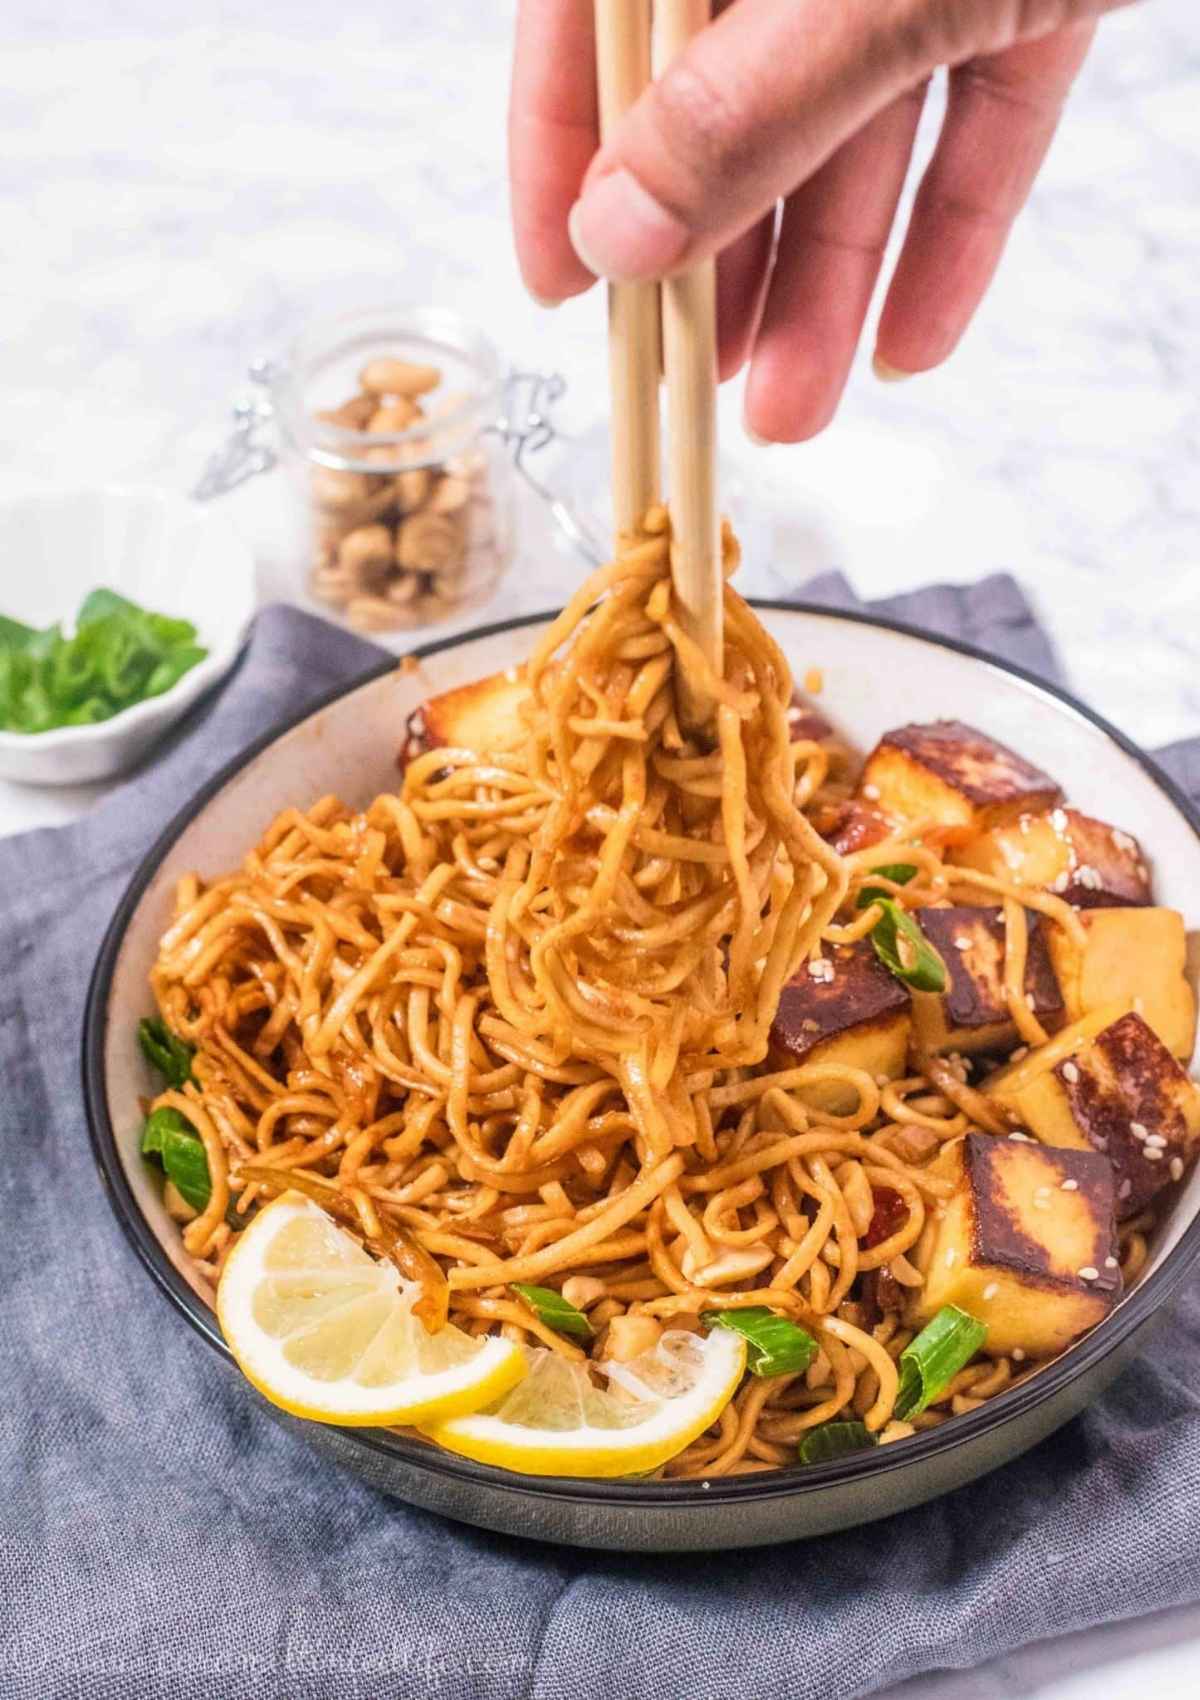 Noodles in a bowl being lifted with chopsticks